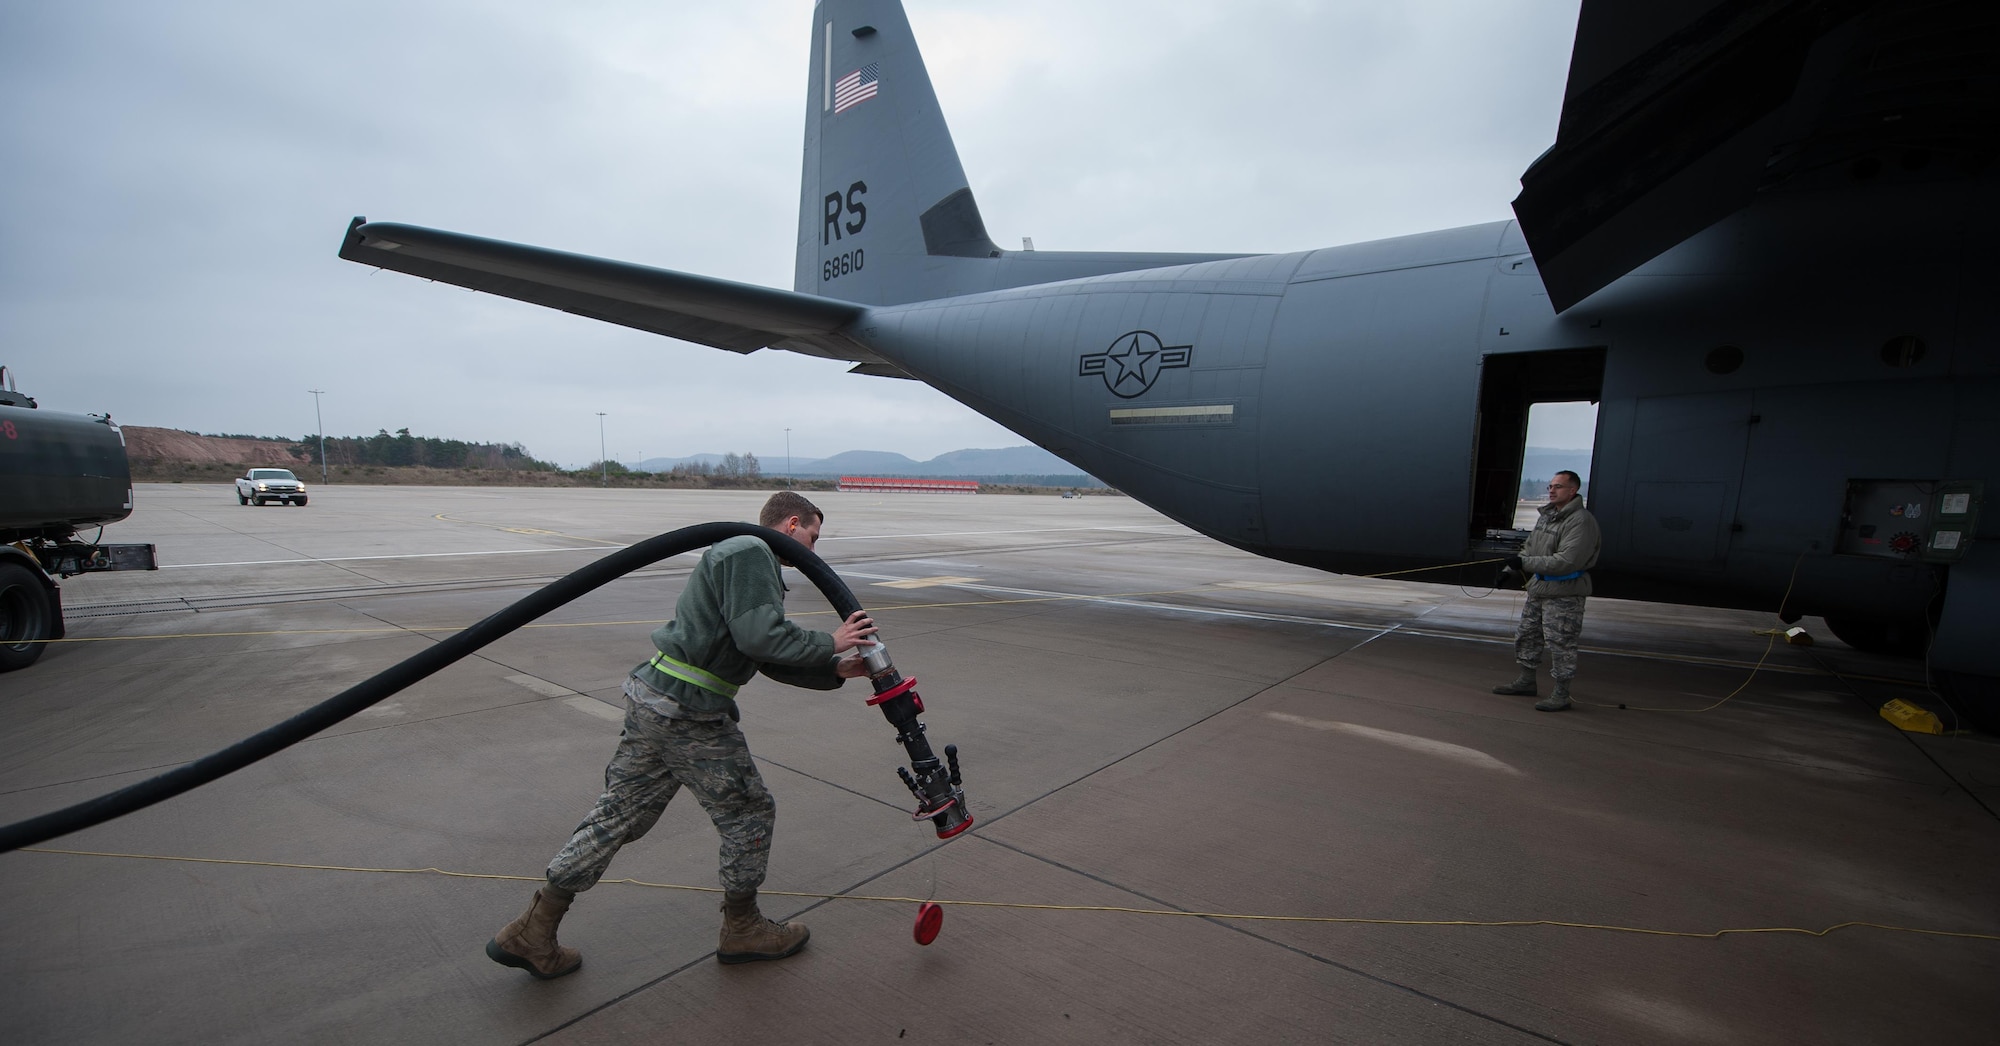 Airman 1st Class Austin Bashaw, 86th Logistics Readiness Squadron fuels specialist, carries a hose from the fuel truck to a parked C-130J Super Hercules at Ramstein Air Base, Germany, Dec. 12, 2016. Fuels specialists are also responsible for operating the vehicles, equipment and storage facilities that are essential to the refueling operation, while also ensuring the compliance of all safety regulations involved with handling these volatile liquids. (U.S. Air Force photo by Airman 1st Class Lane T. Plummer)